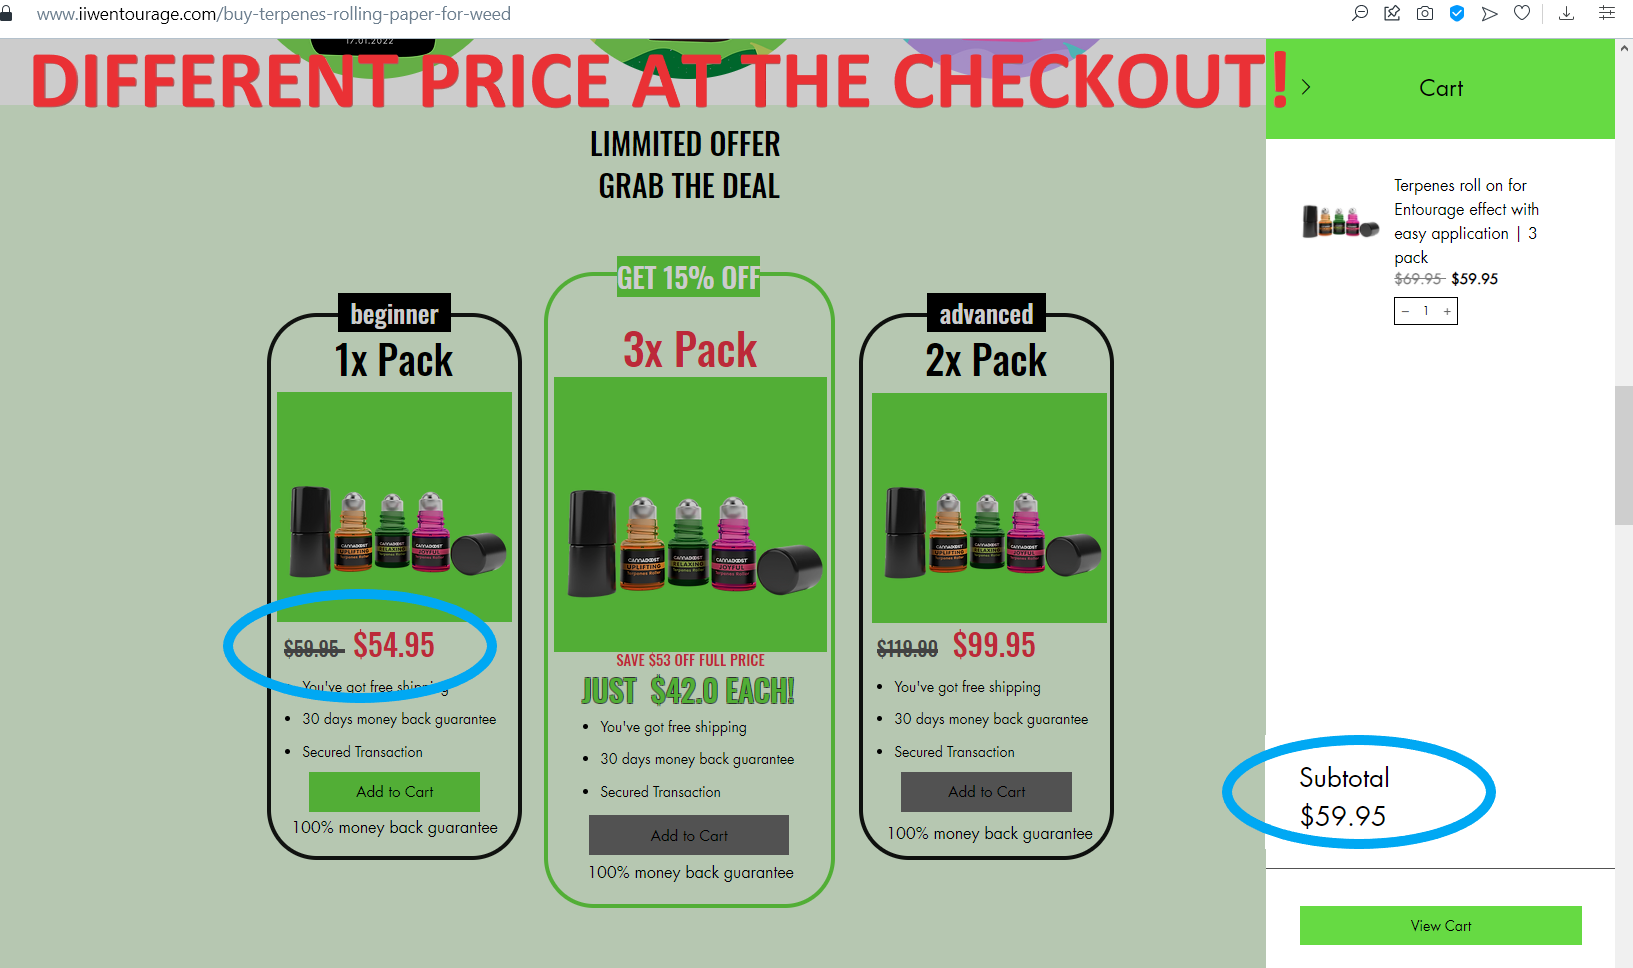 Difference between advertising price and checkout!